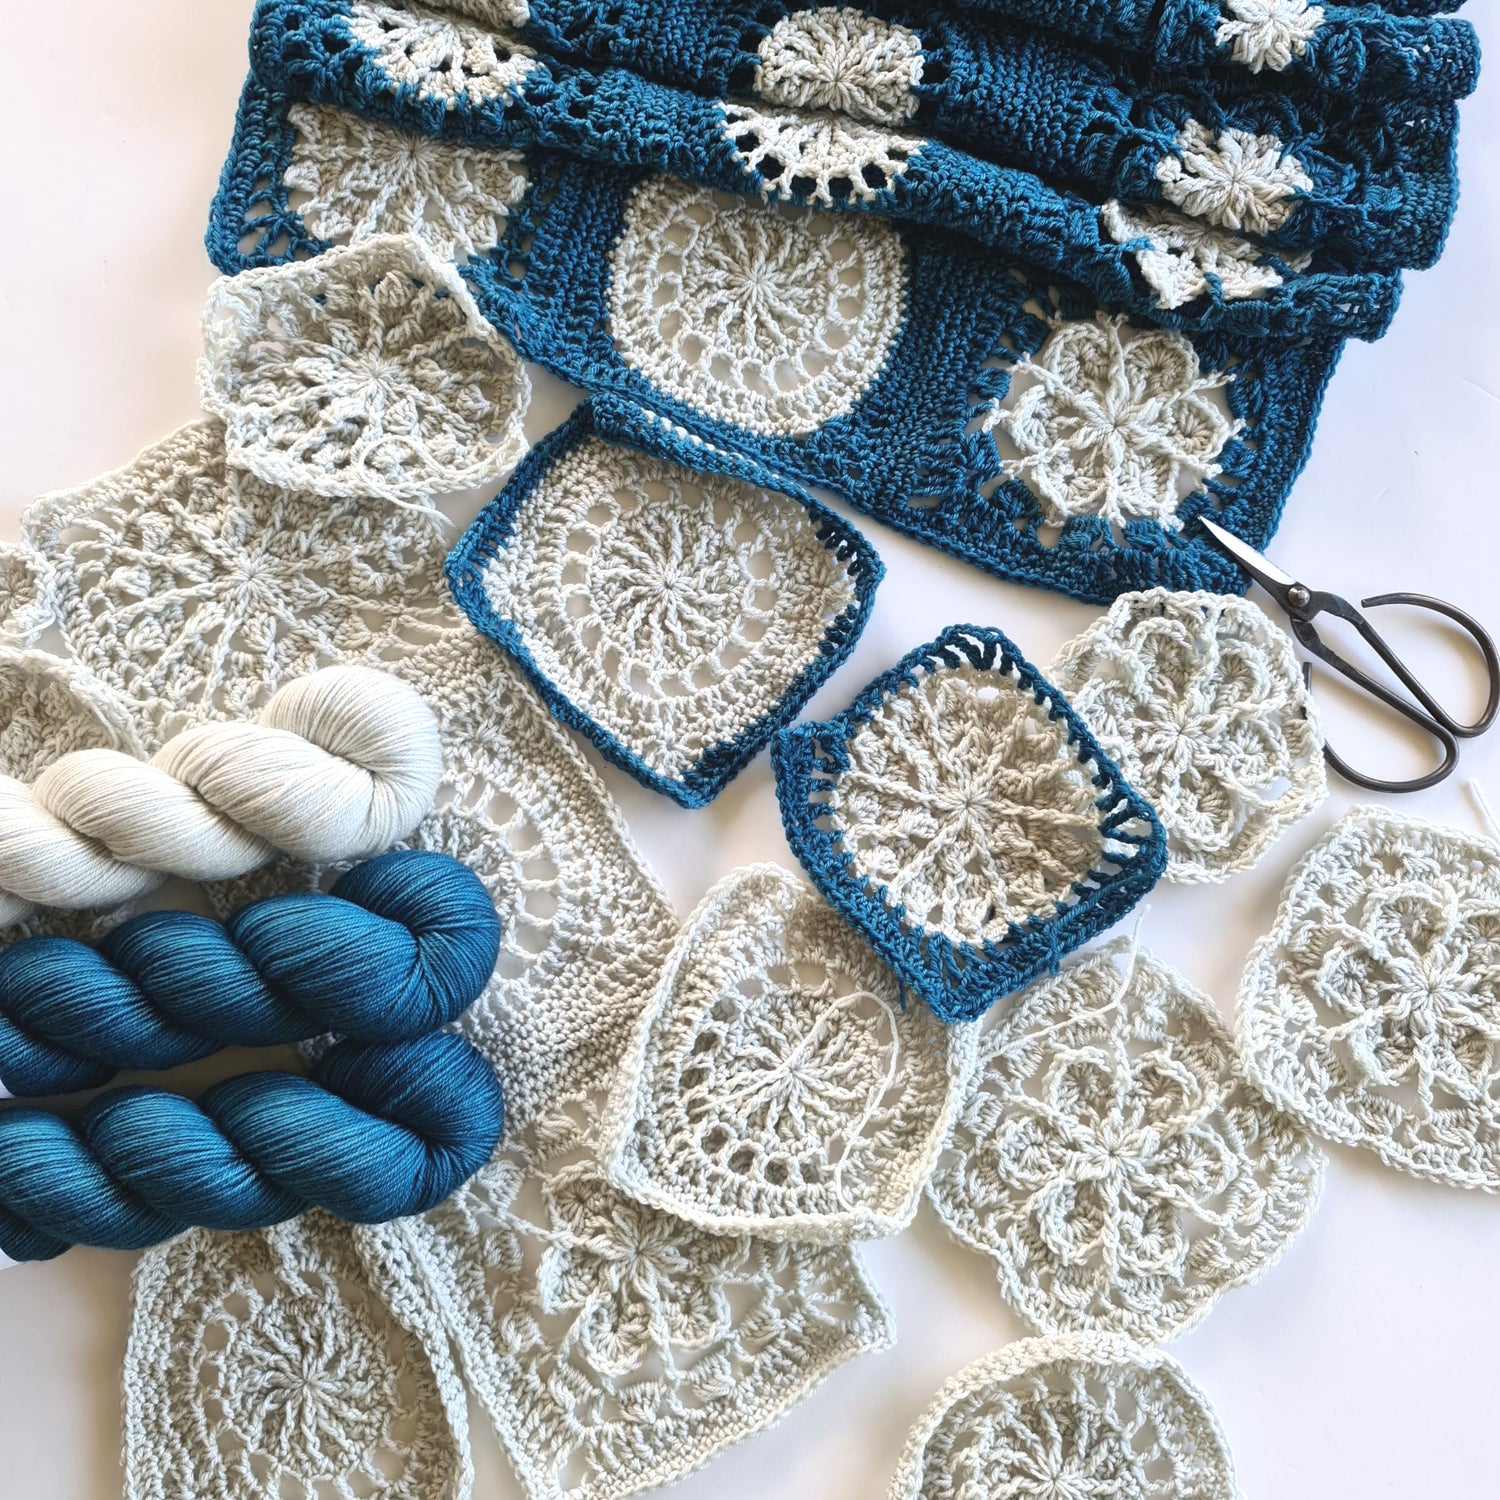 Work in progress of all white and blue and white versions of Frosty Flair Scarf Project by Shelley Husband